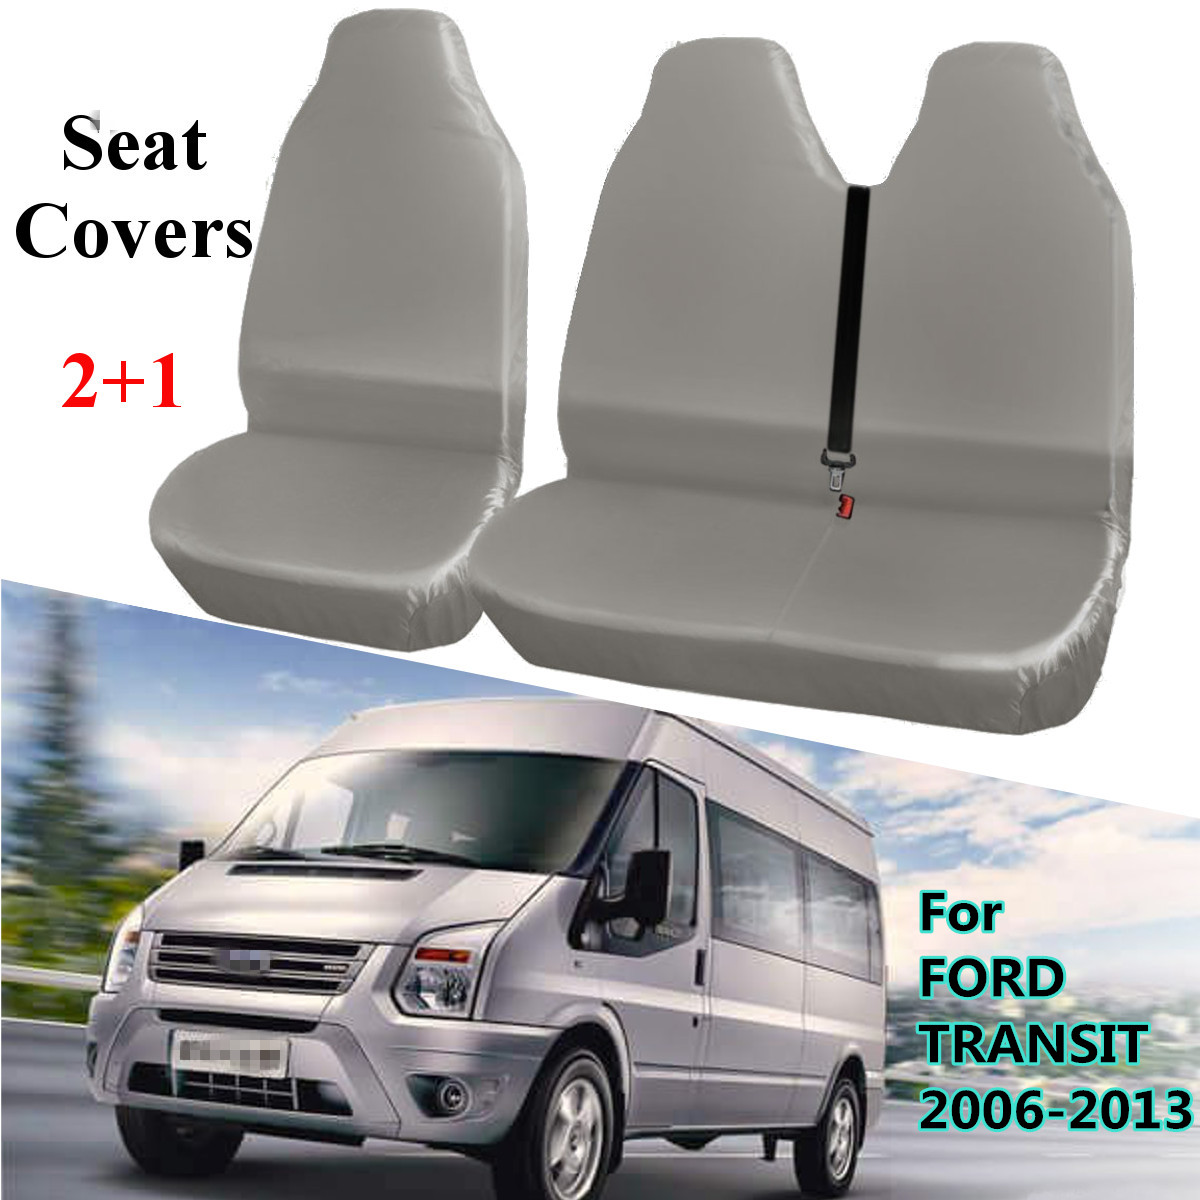 21-Gray-800d-Oxford-Van-Car-Seat-Cover-Waterproof-Cushion-Protector-for-FORD-TRANSIT-2006-2013-1371998